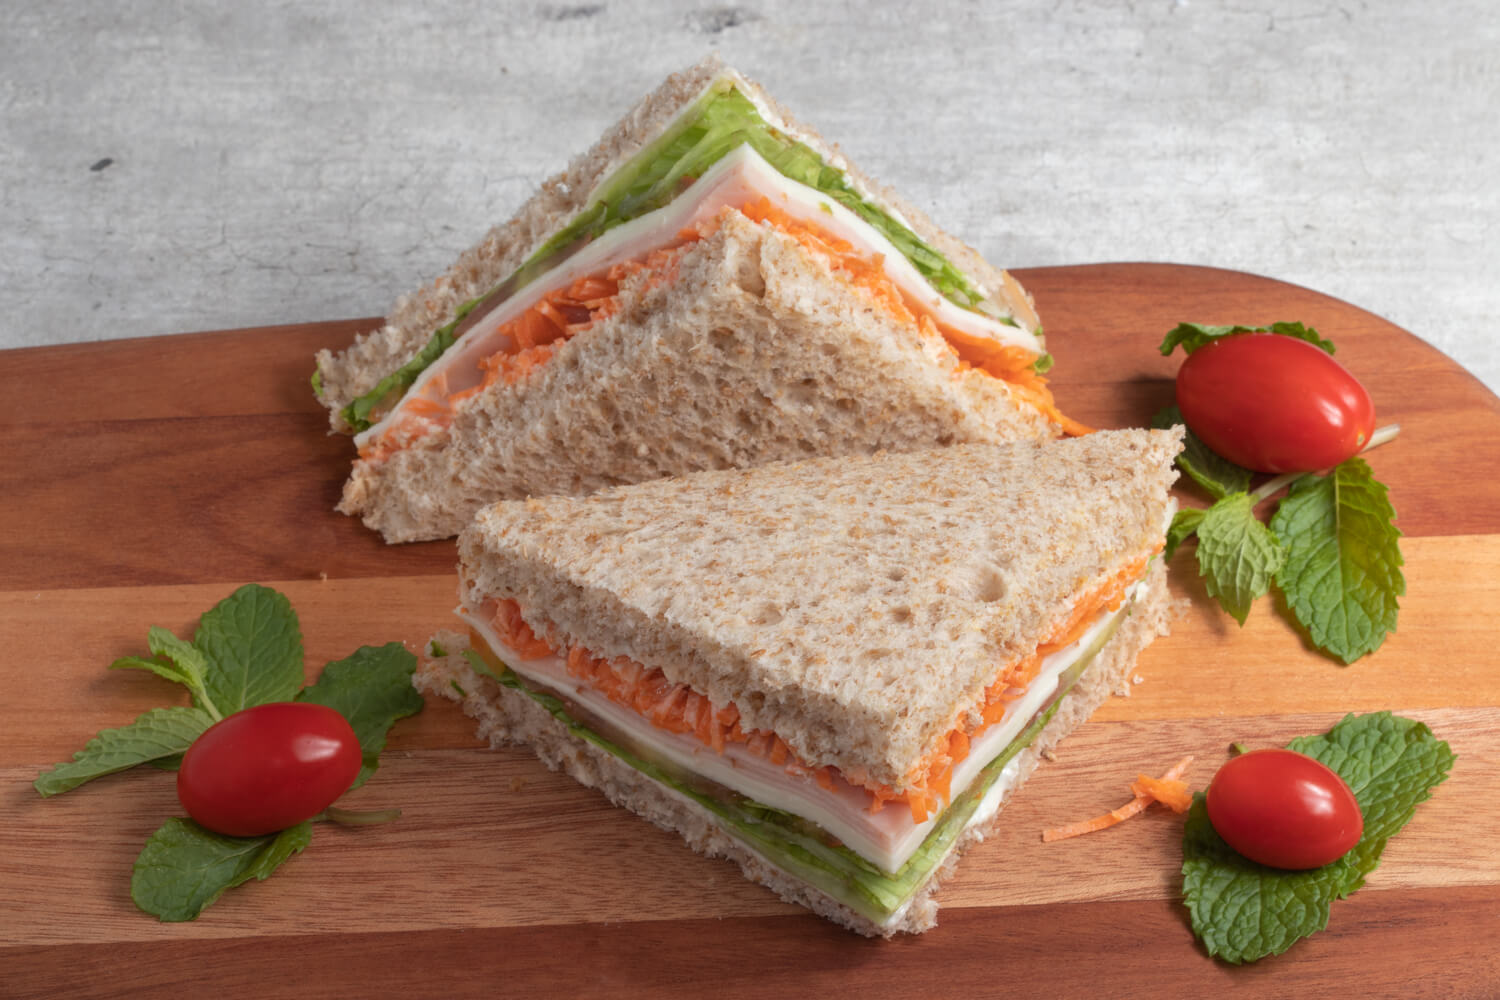 Apple and Carrot Sandwiches (1)